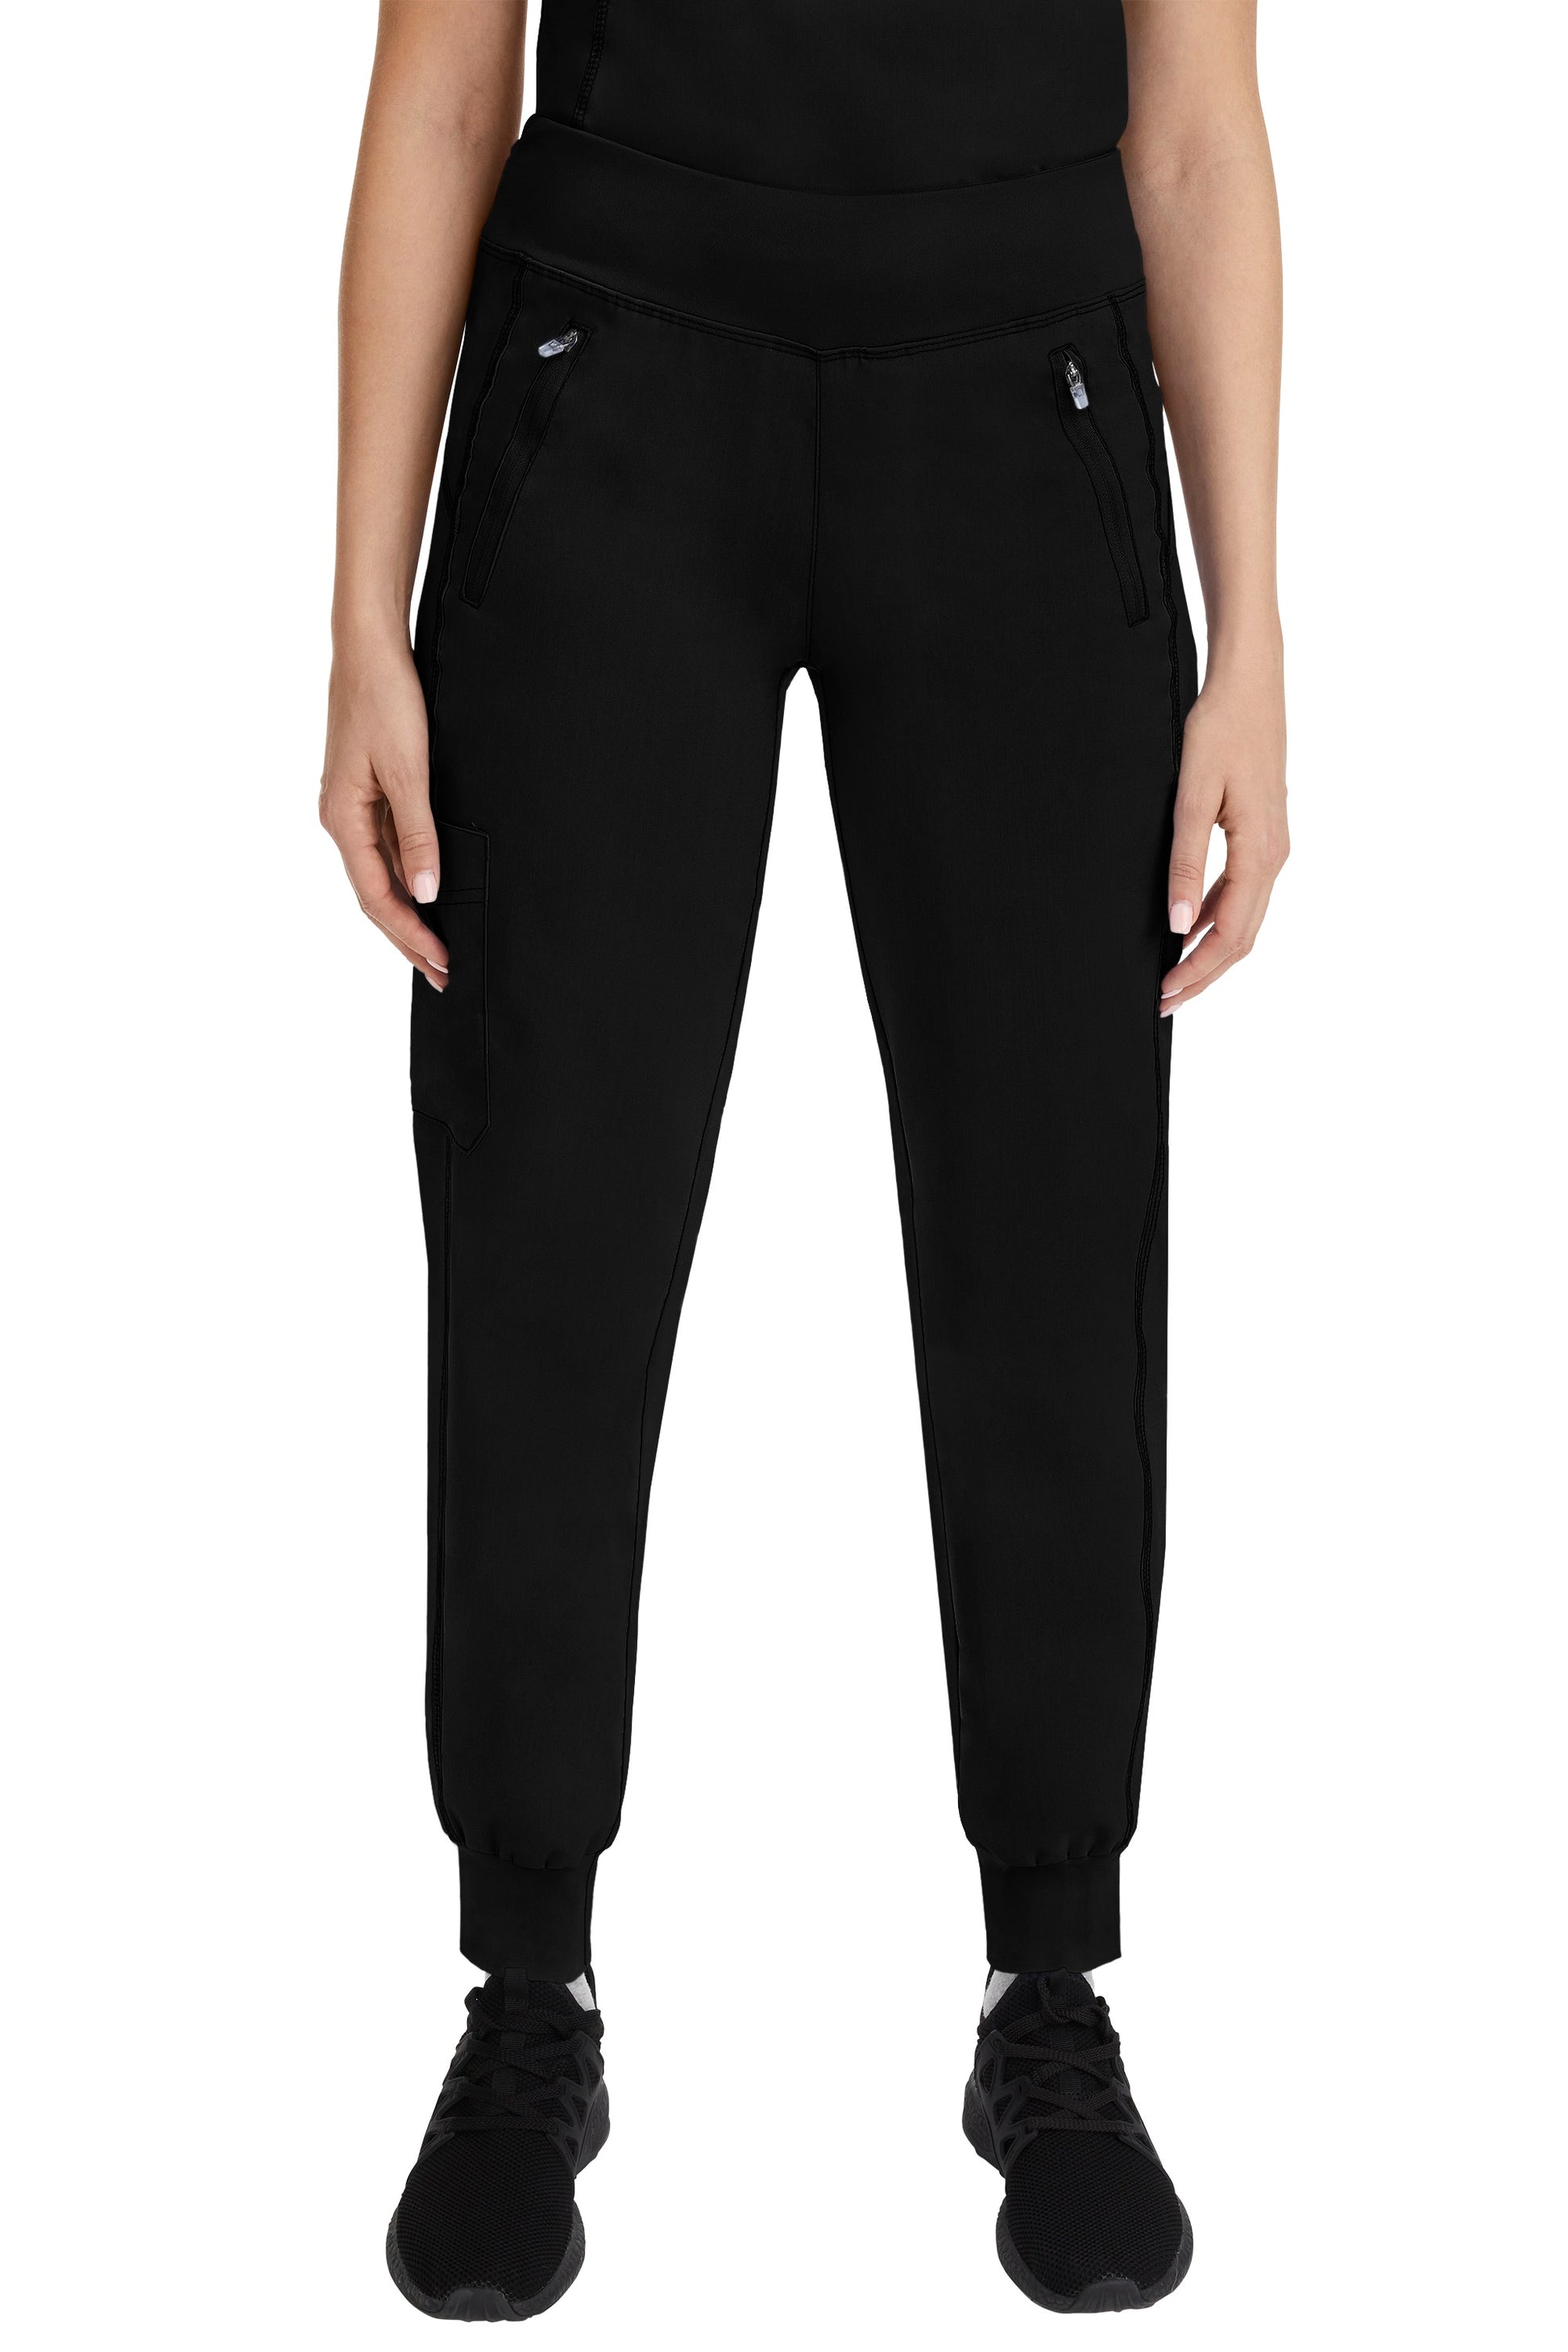 Healing Hands Purple Label Yoga Tara Jogger Petite Scrub Pant in Black at Parker's Clothing and Shoes.